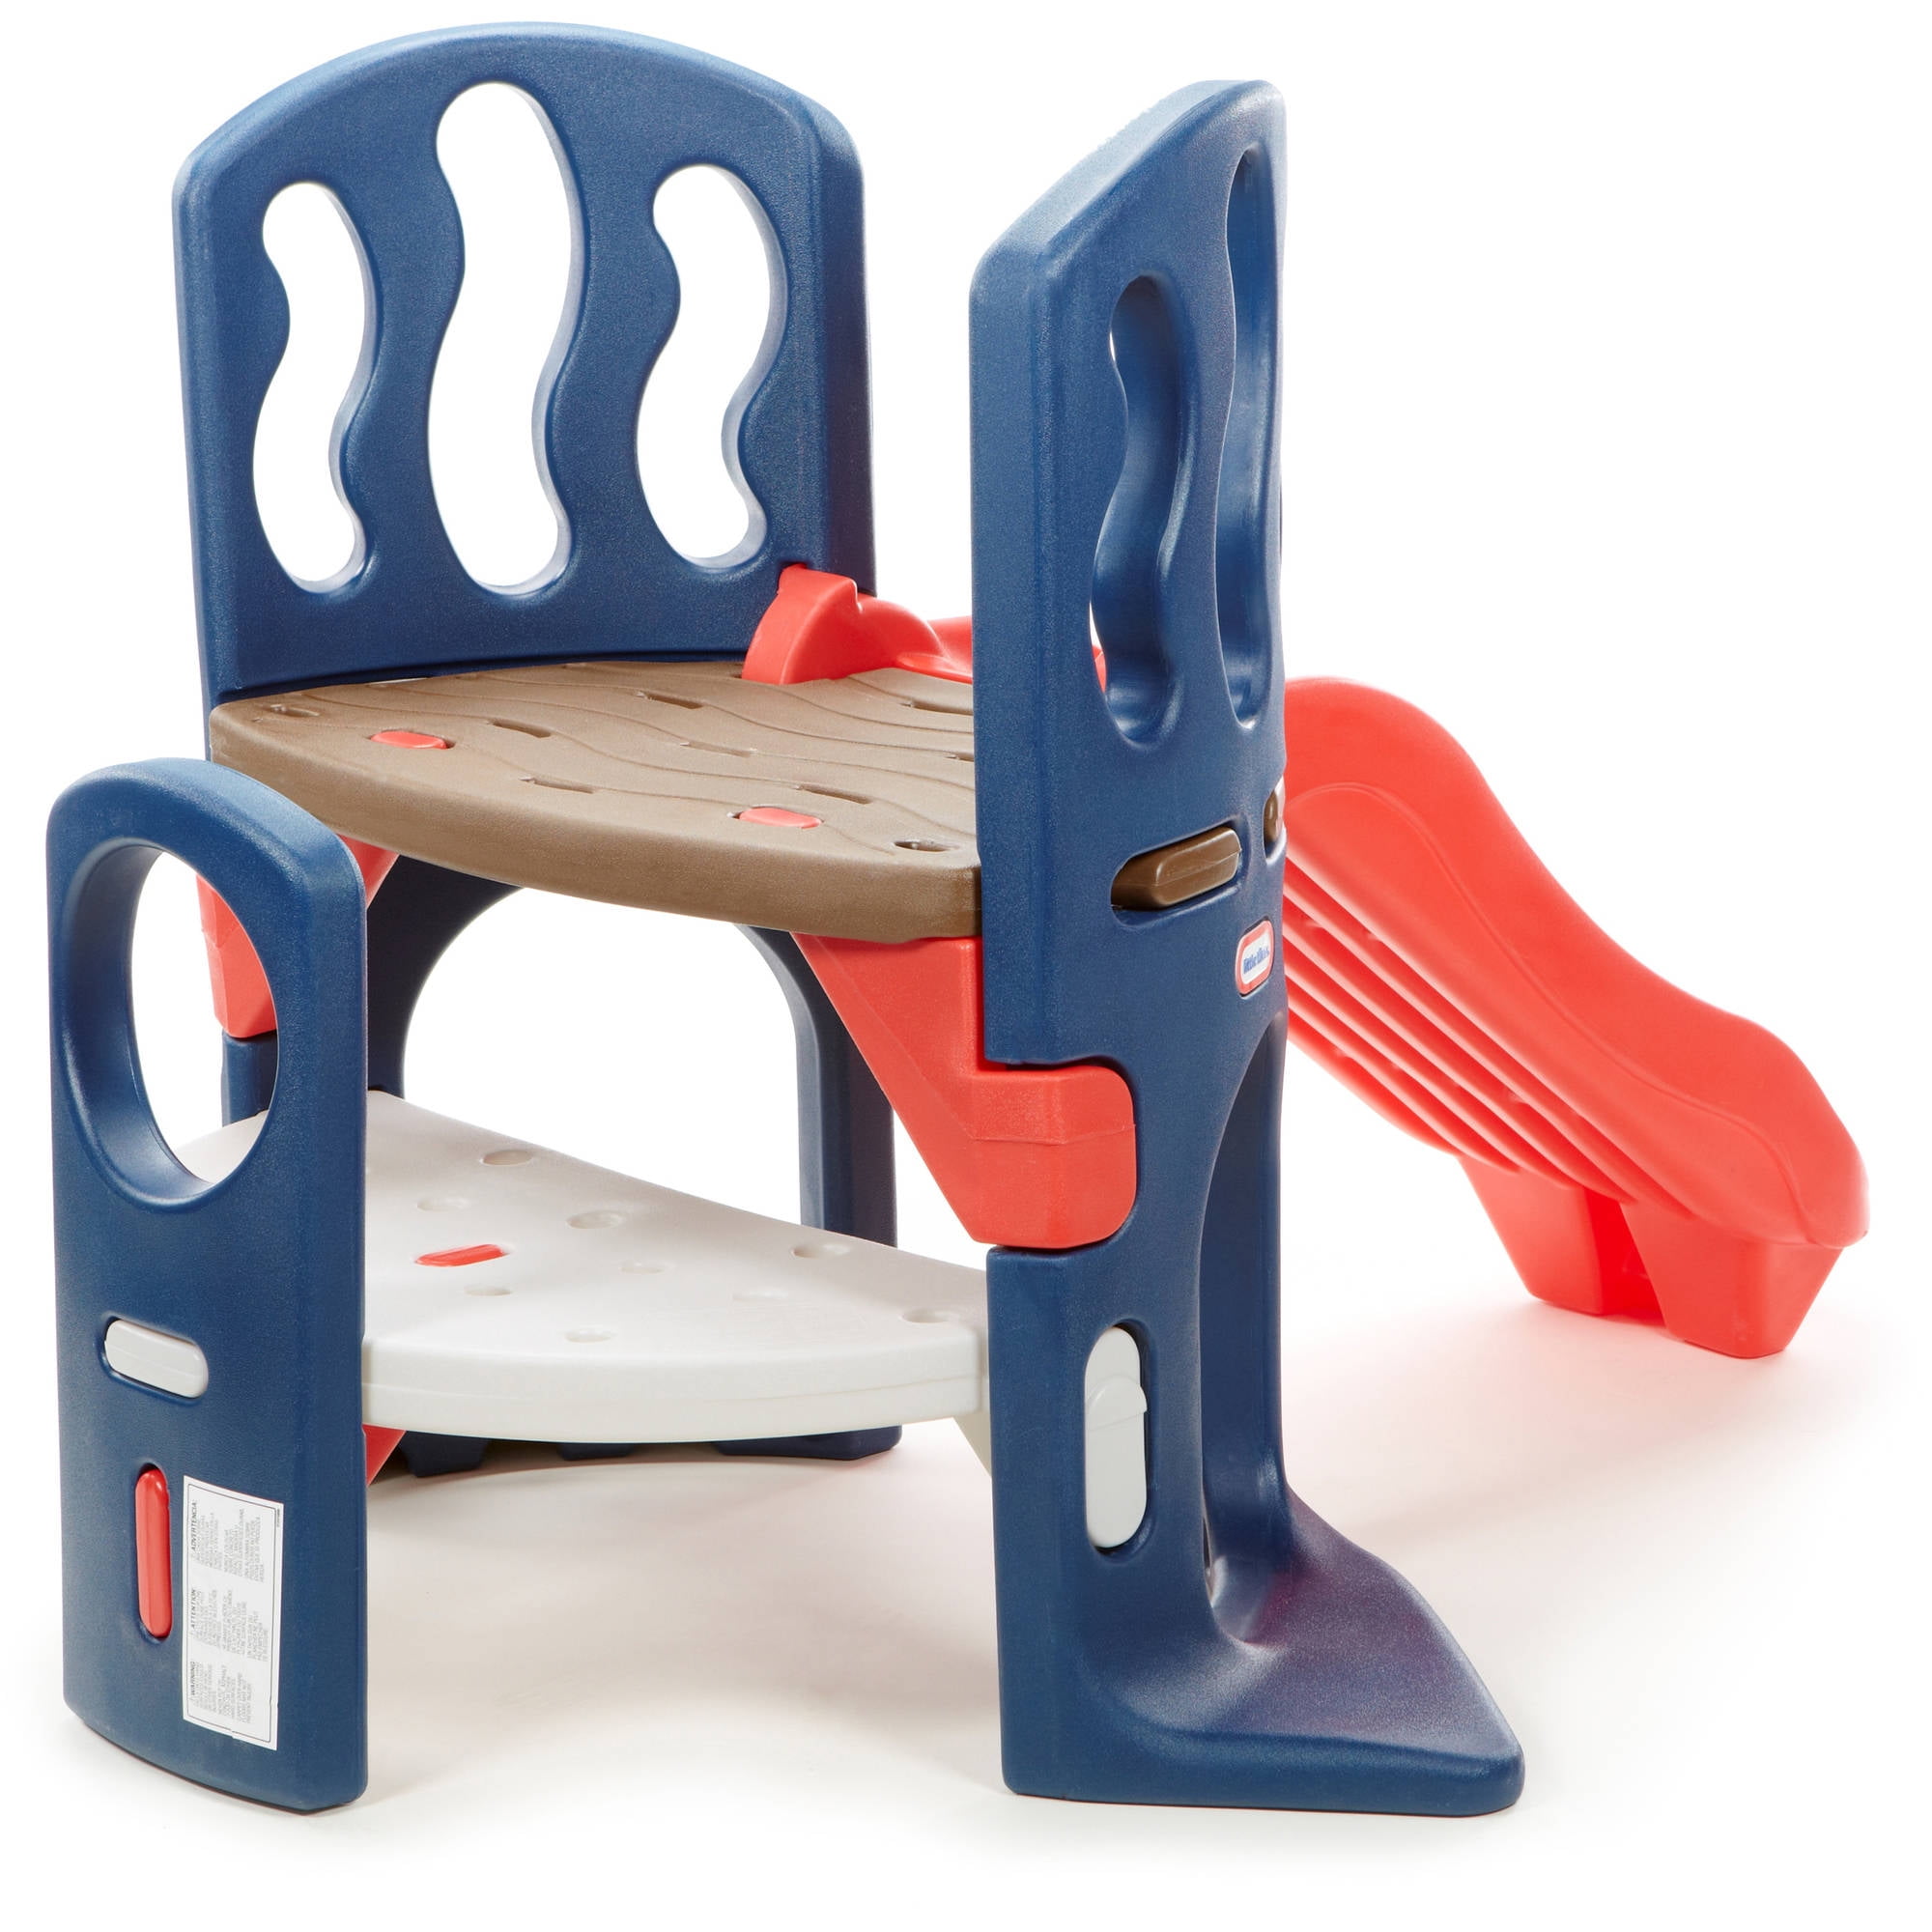 Little Tikes Hide & Slide Climber, Blue & Red - Climbing Toy and Slide for Kids Ages 2 to 6 - 1